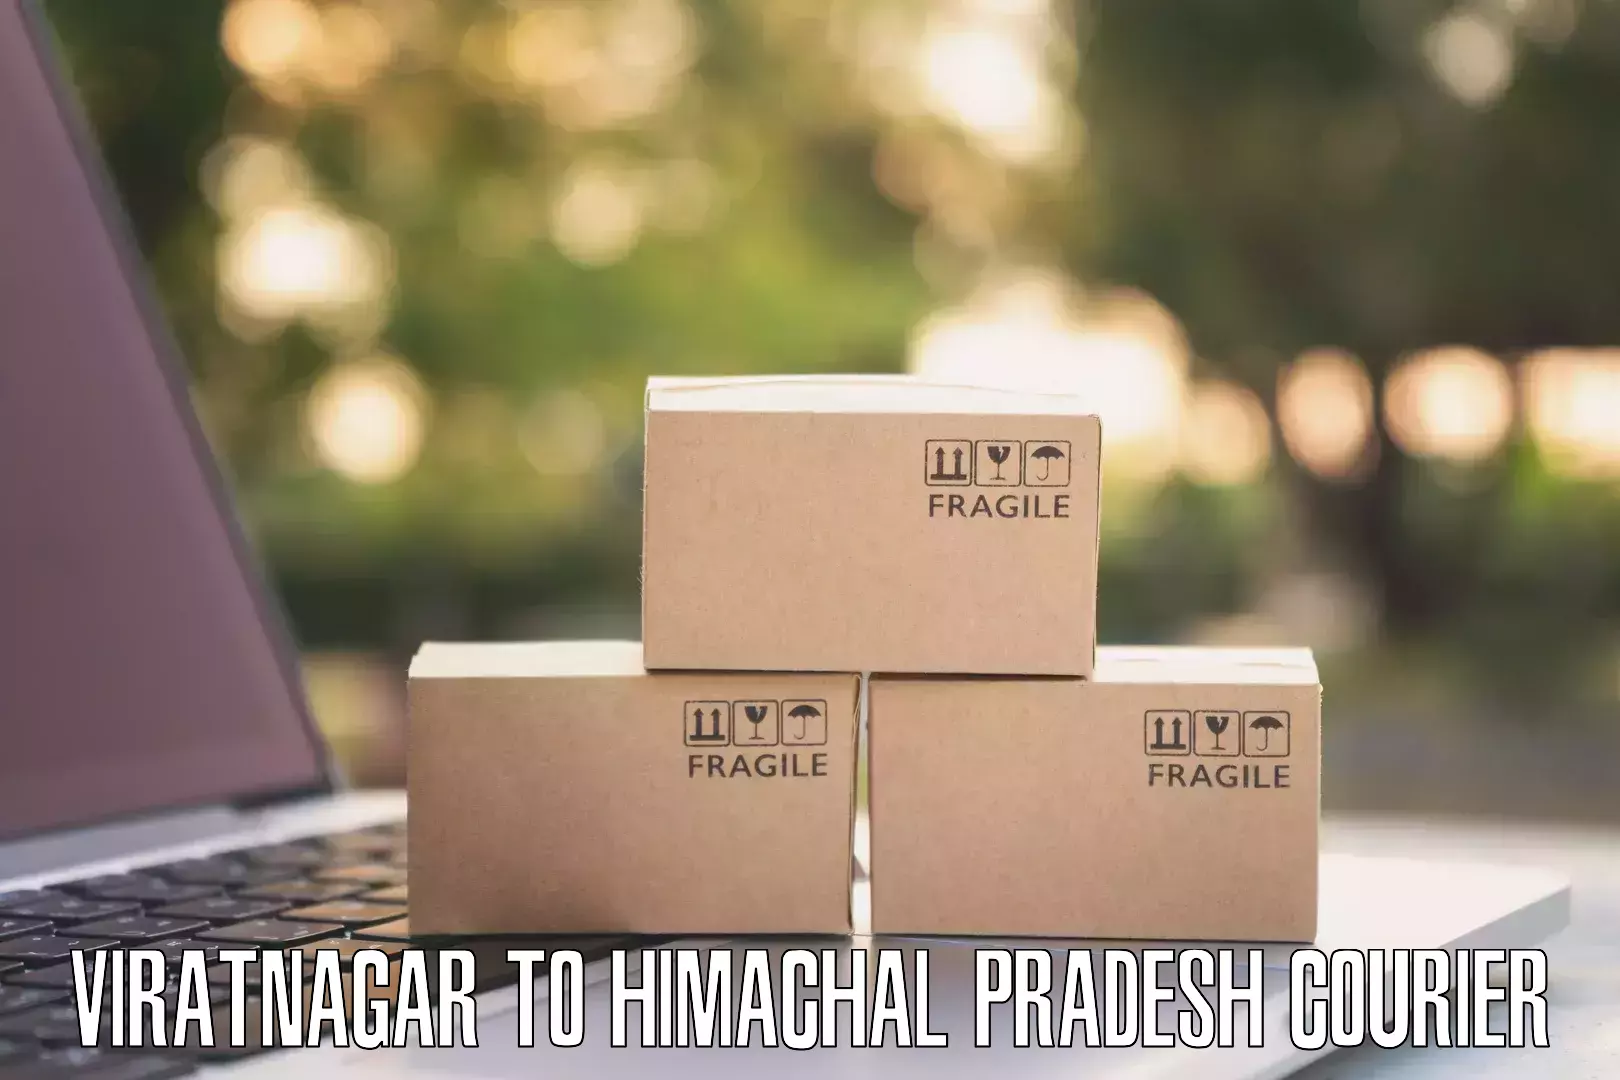 Global parcel delivery Viratnagar to YS Parmar University of Horticulture and Forestry Solan